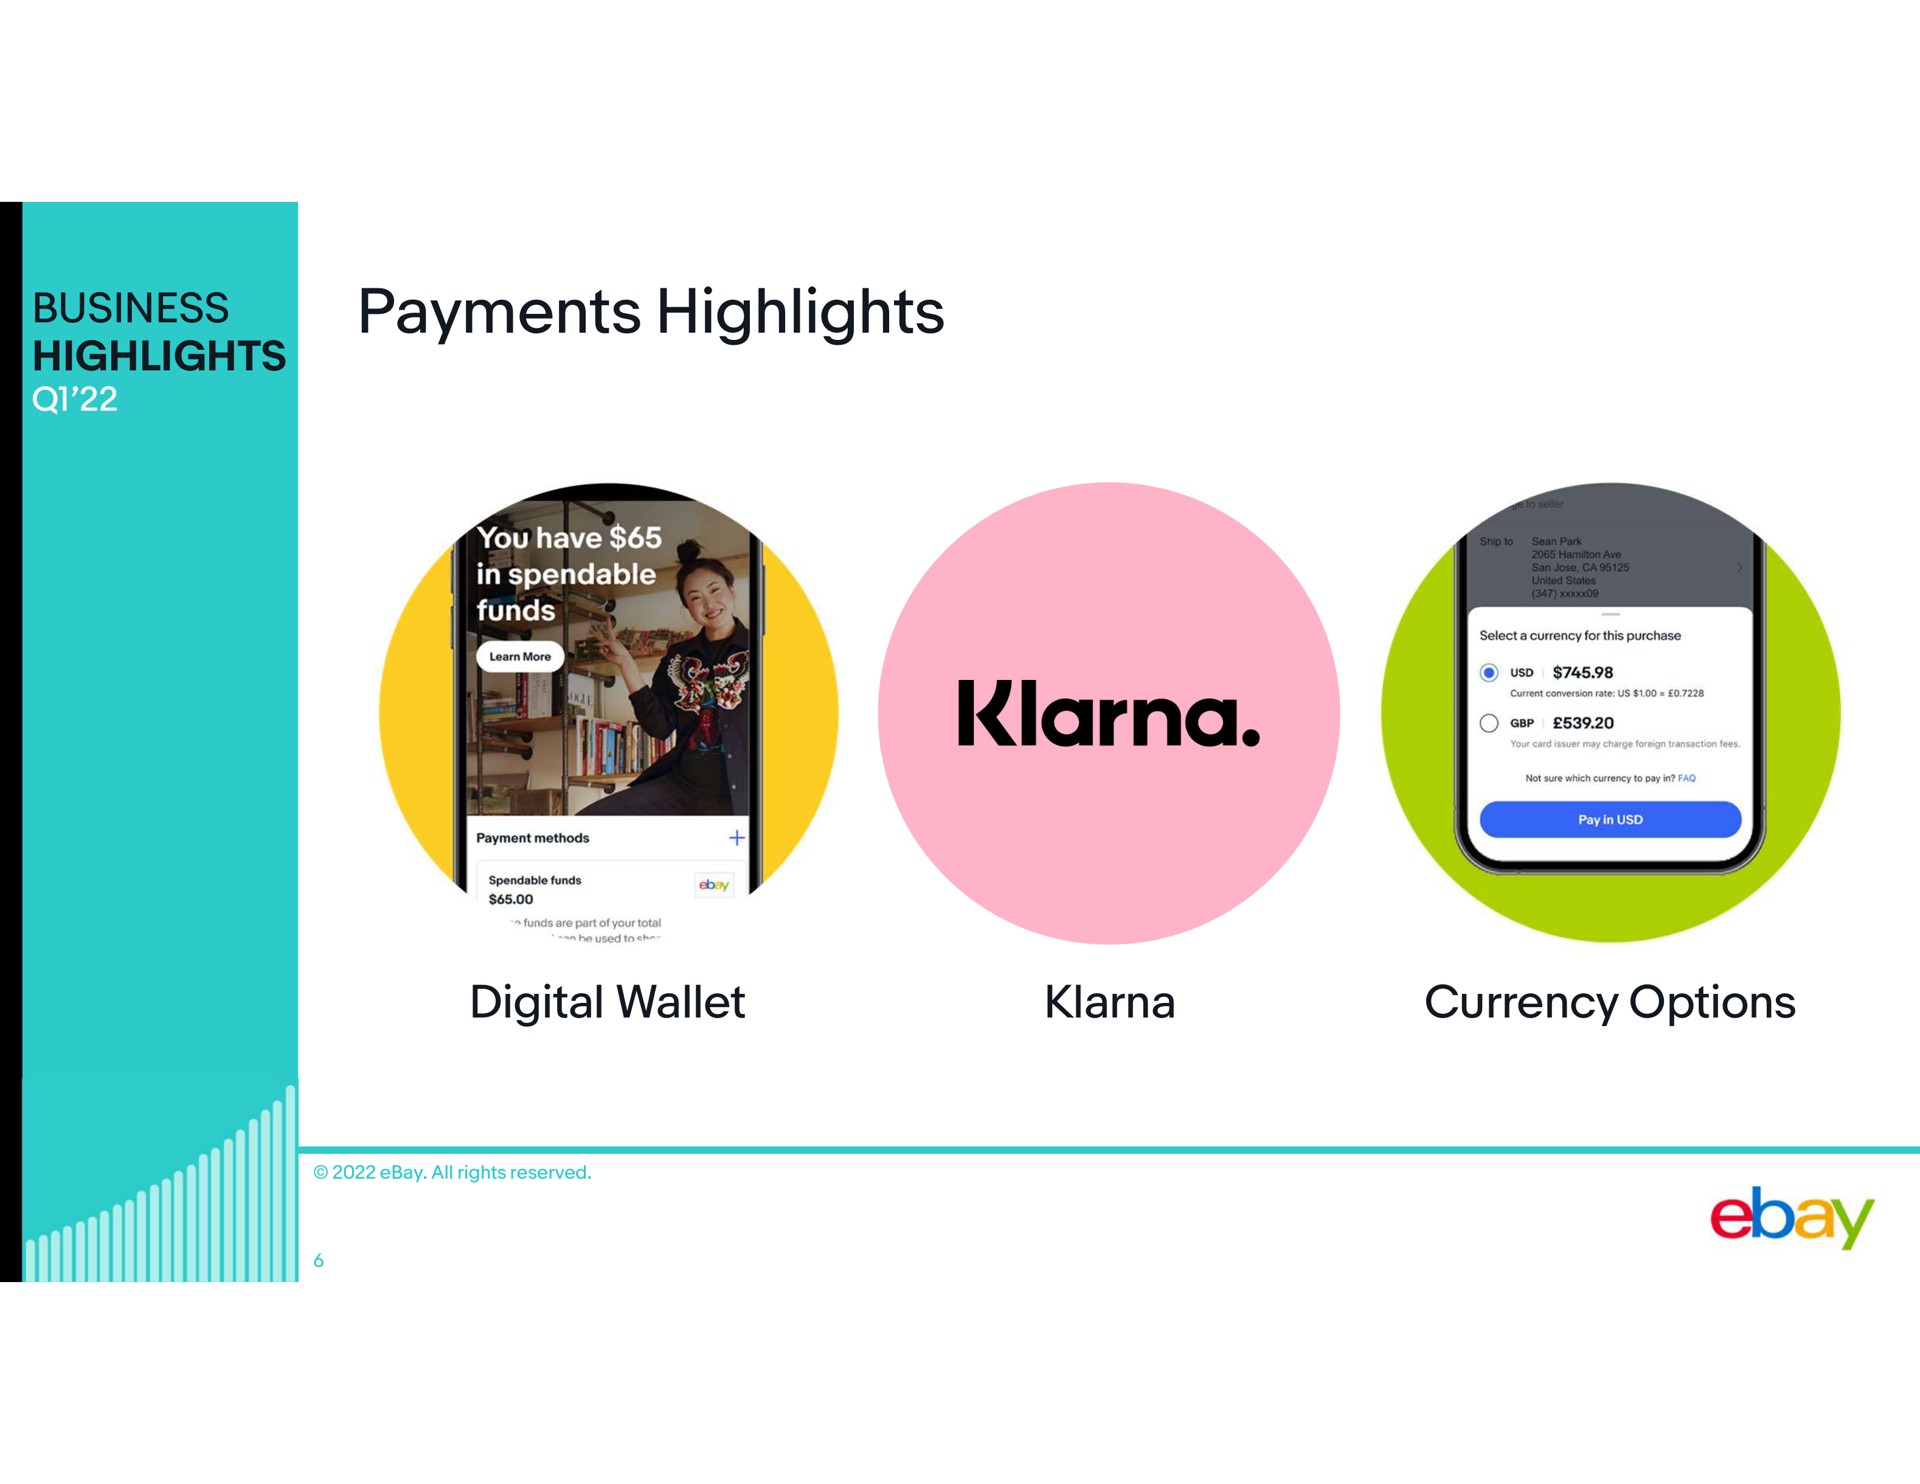 business highlights payments highlights digital wallet currency options | eBay